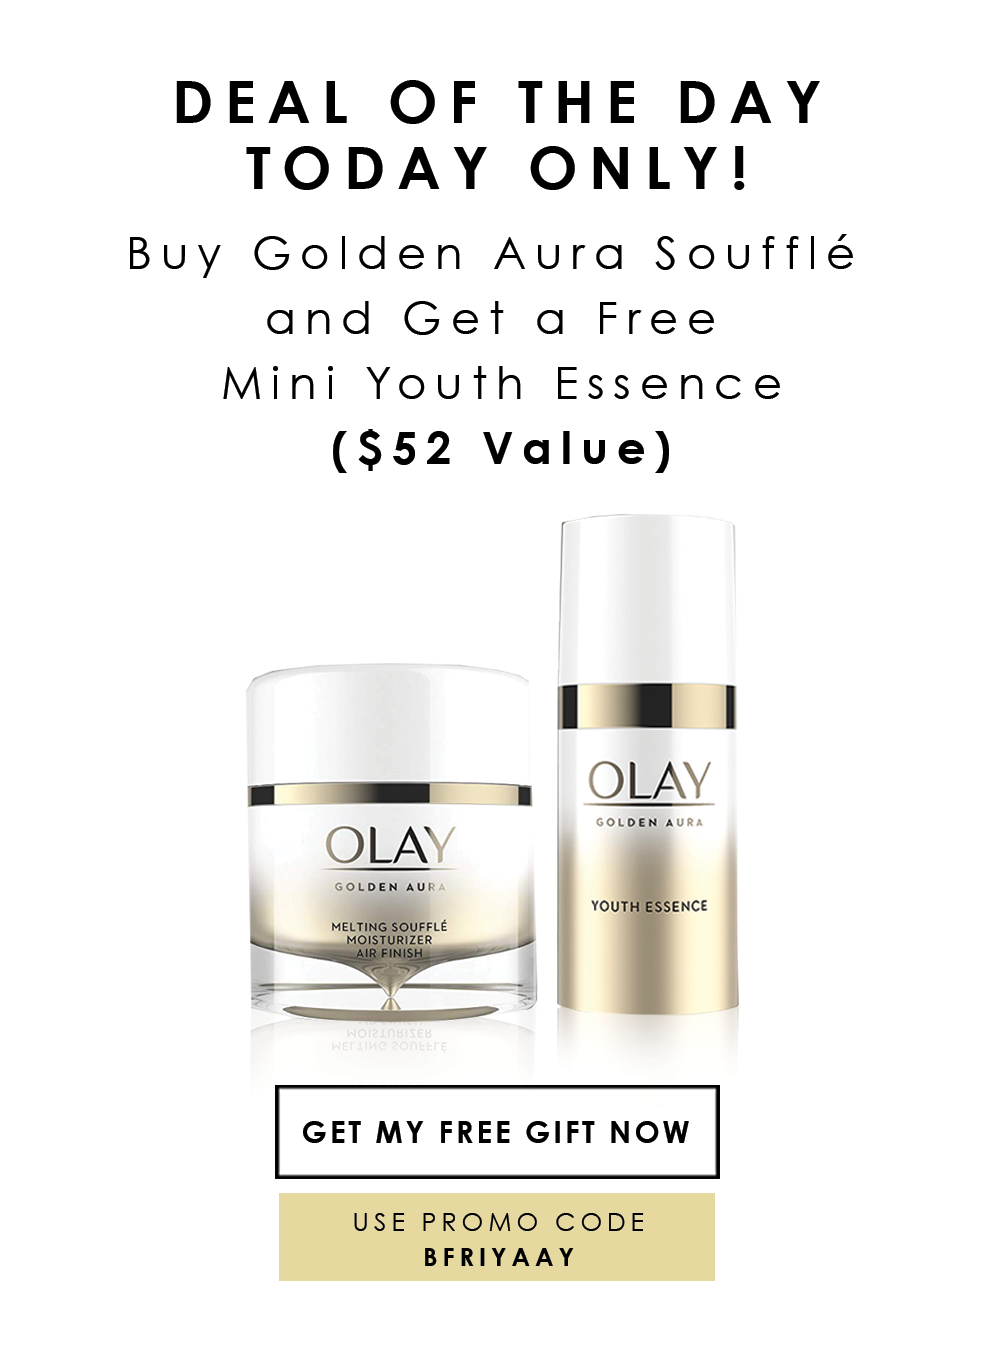 Deal of the day: Buy Golden Aura Souffle and get a free mini youth essence